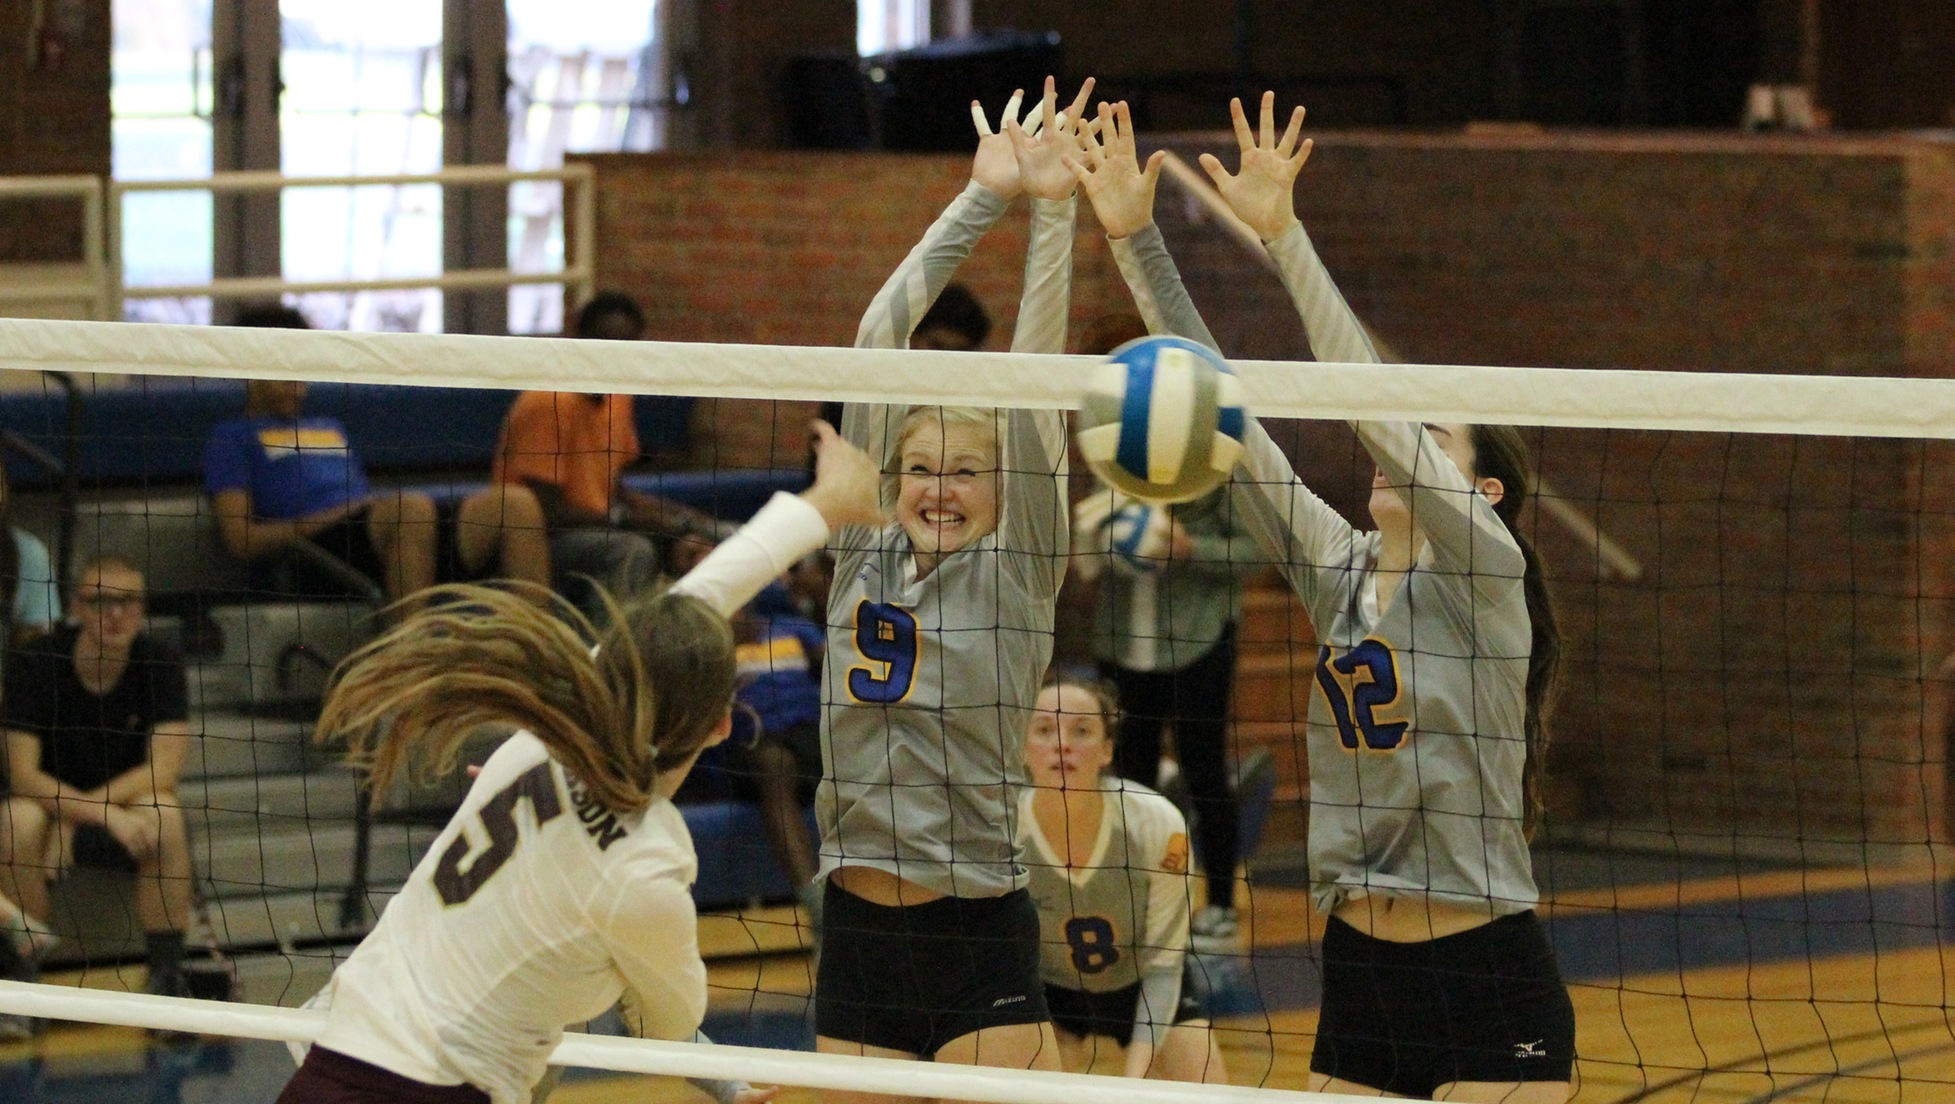 Muskegon Community College's Middie Heiss and Amber Jacobs try to block Jackson College's Camryn Ward. 
Photo: Muskegon Community College